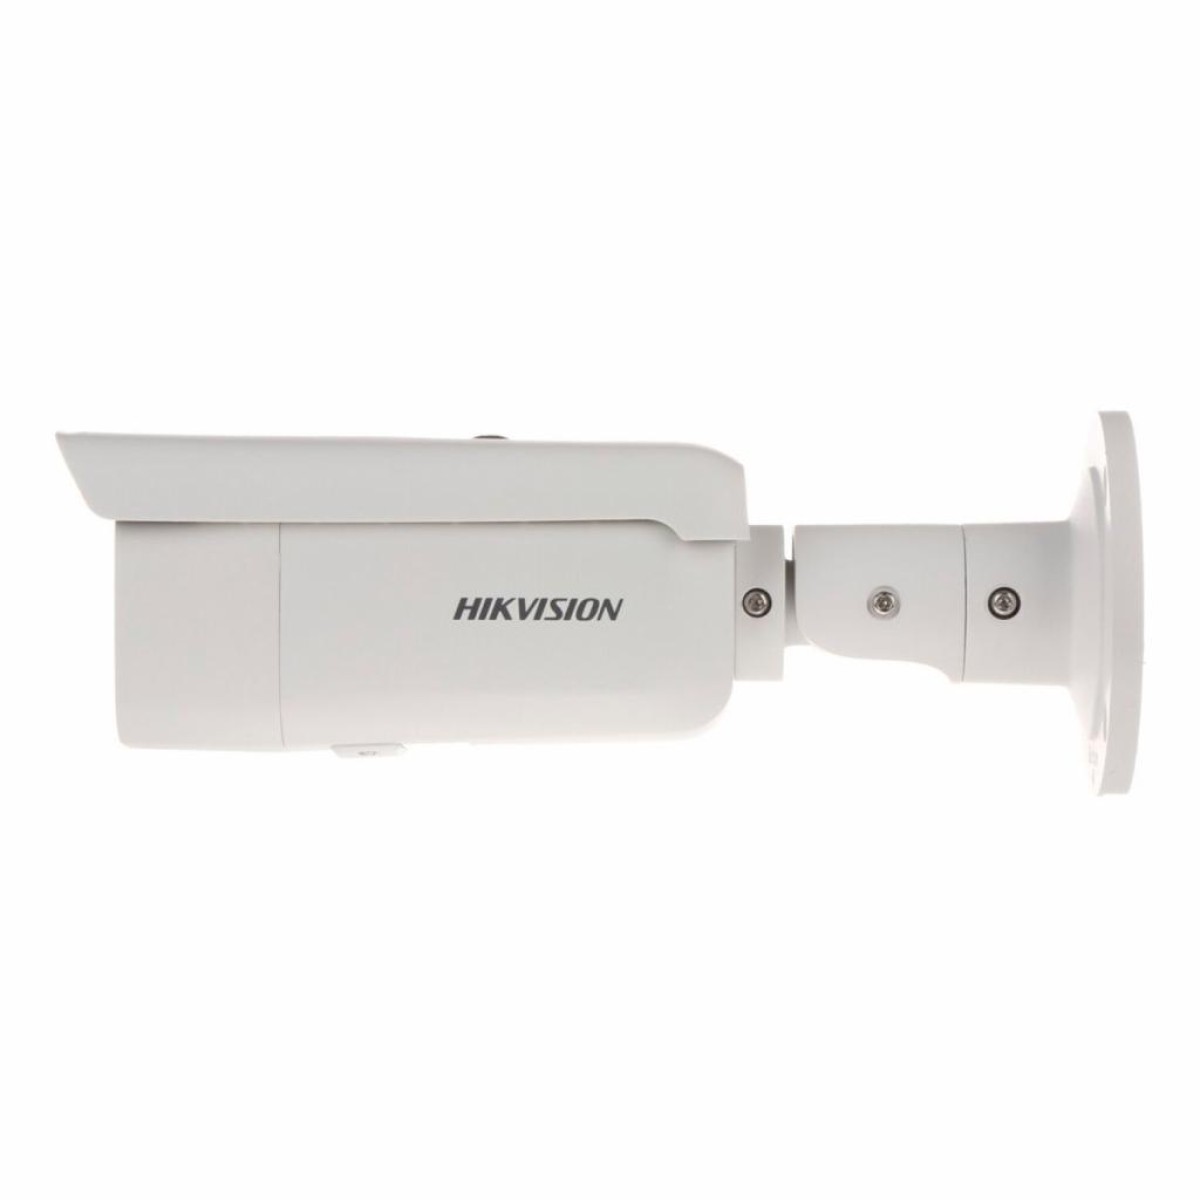 IP-камера Hikvision DS-2CD2T85G1-I8 (6.0) 98_98.jpg - фото 3